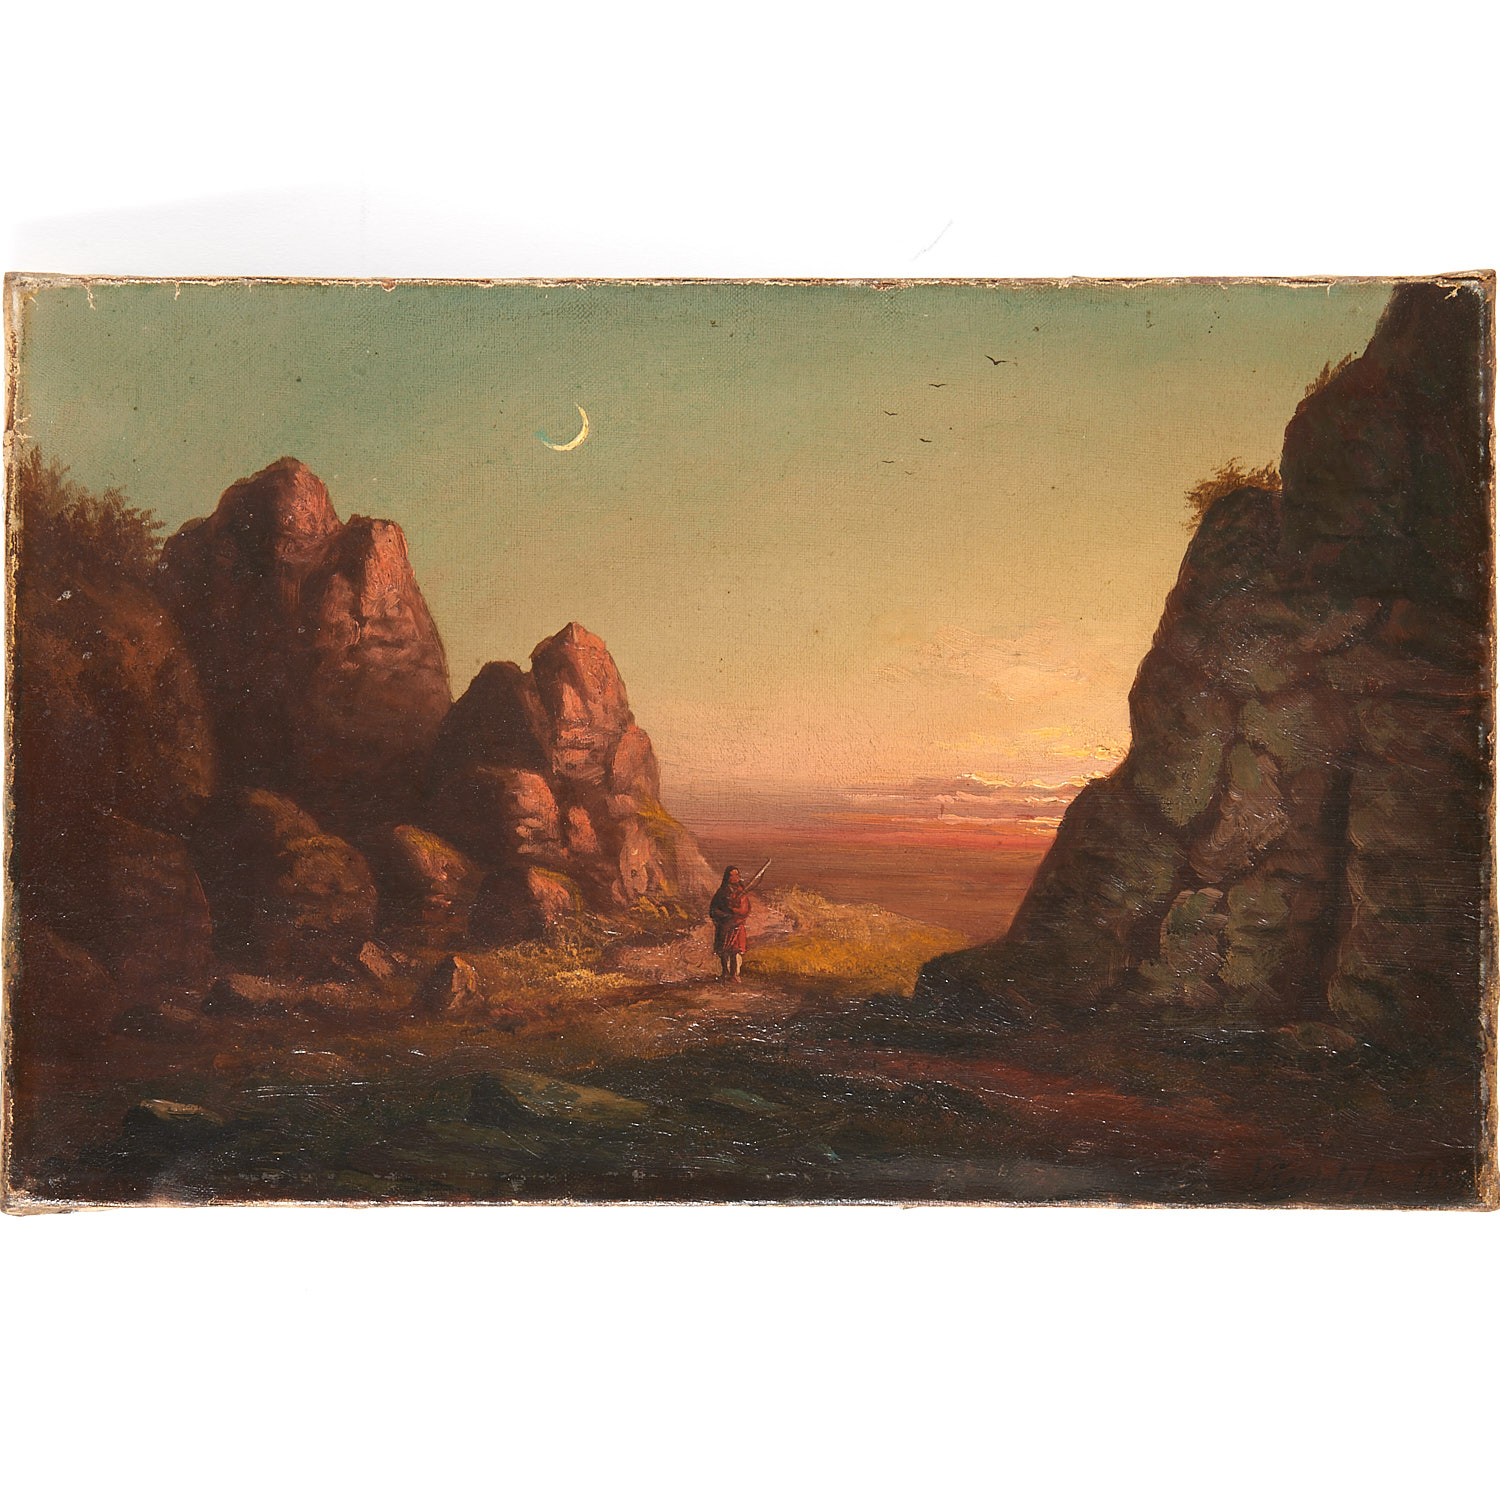 Harold Rudolph, painting, 1874 - Image 2 of 7